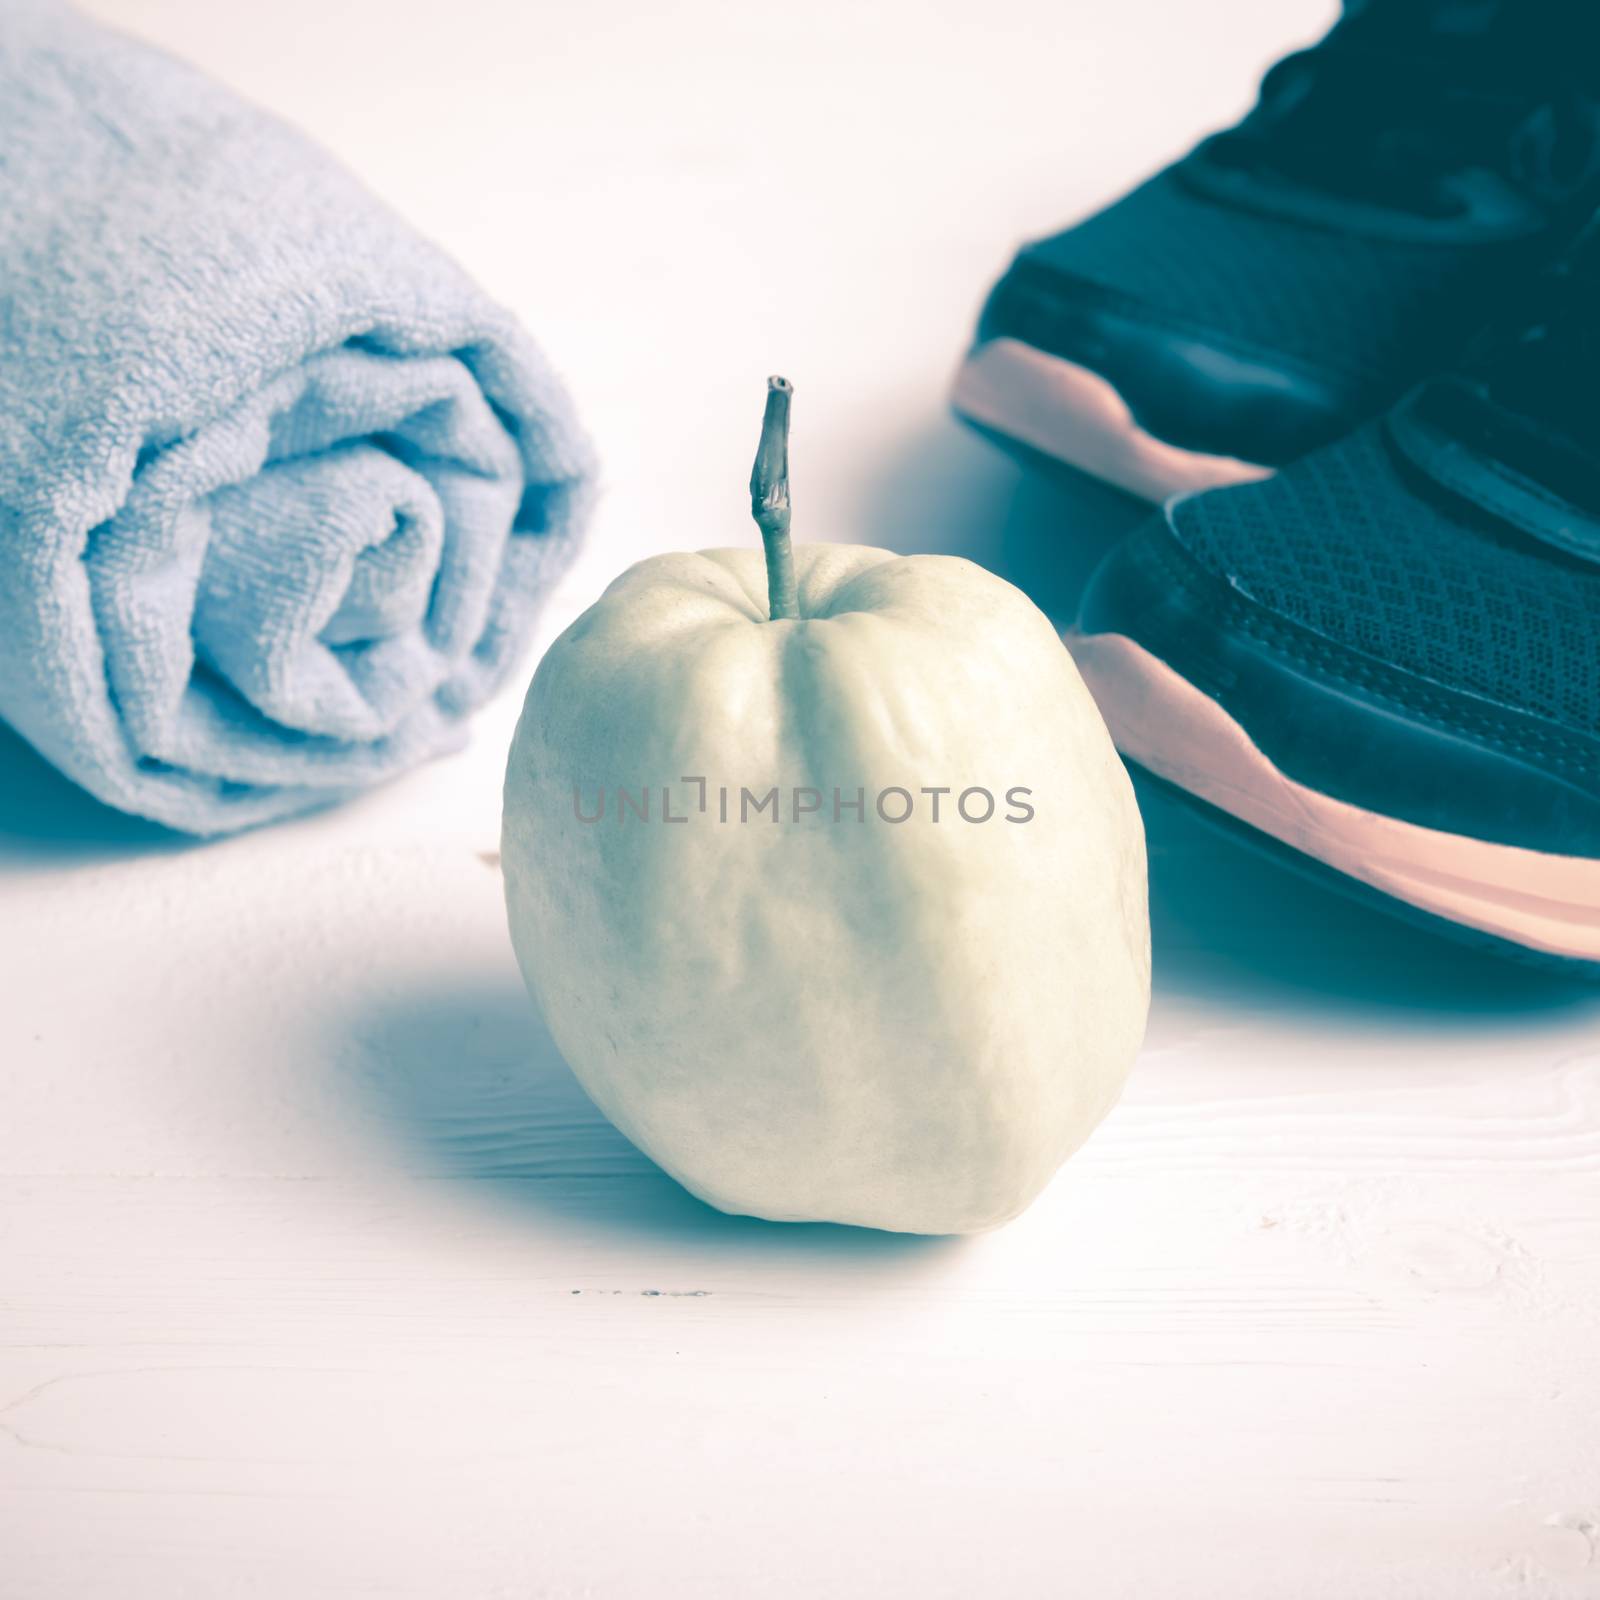 fitness equipment : running shoes,blue towel and guava fruit on white wood table vintage style